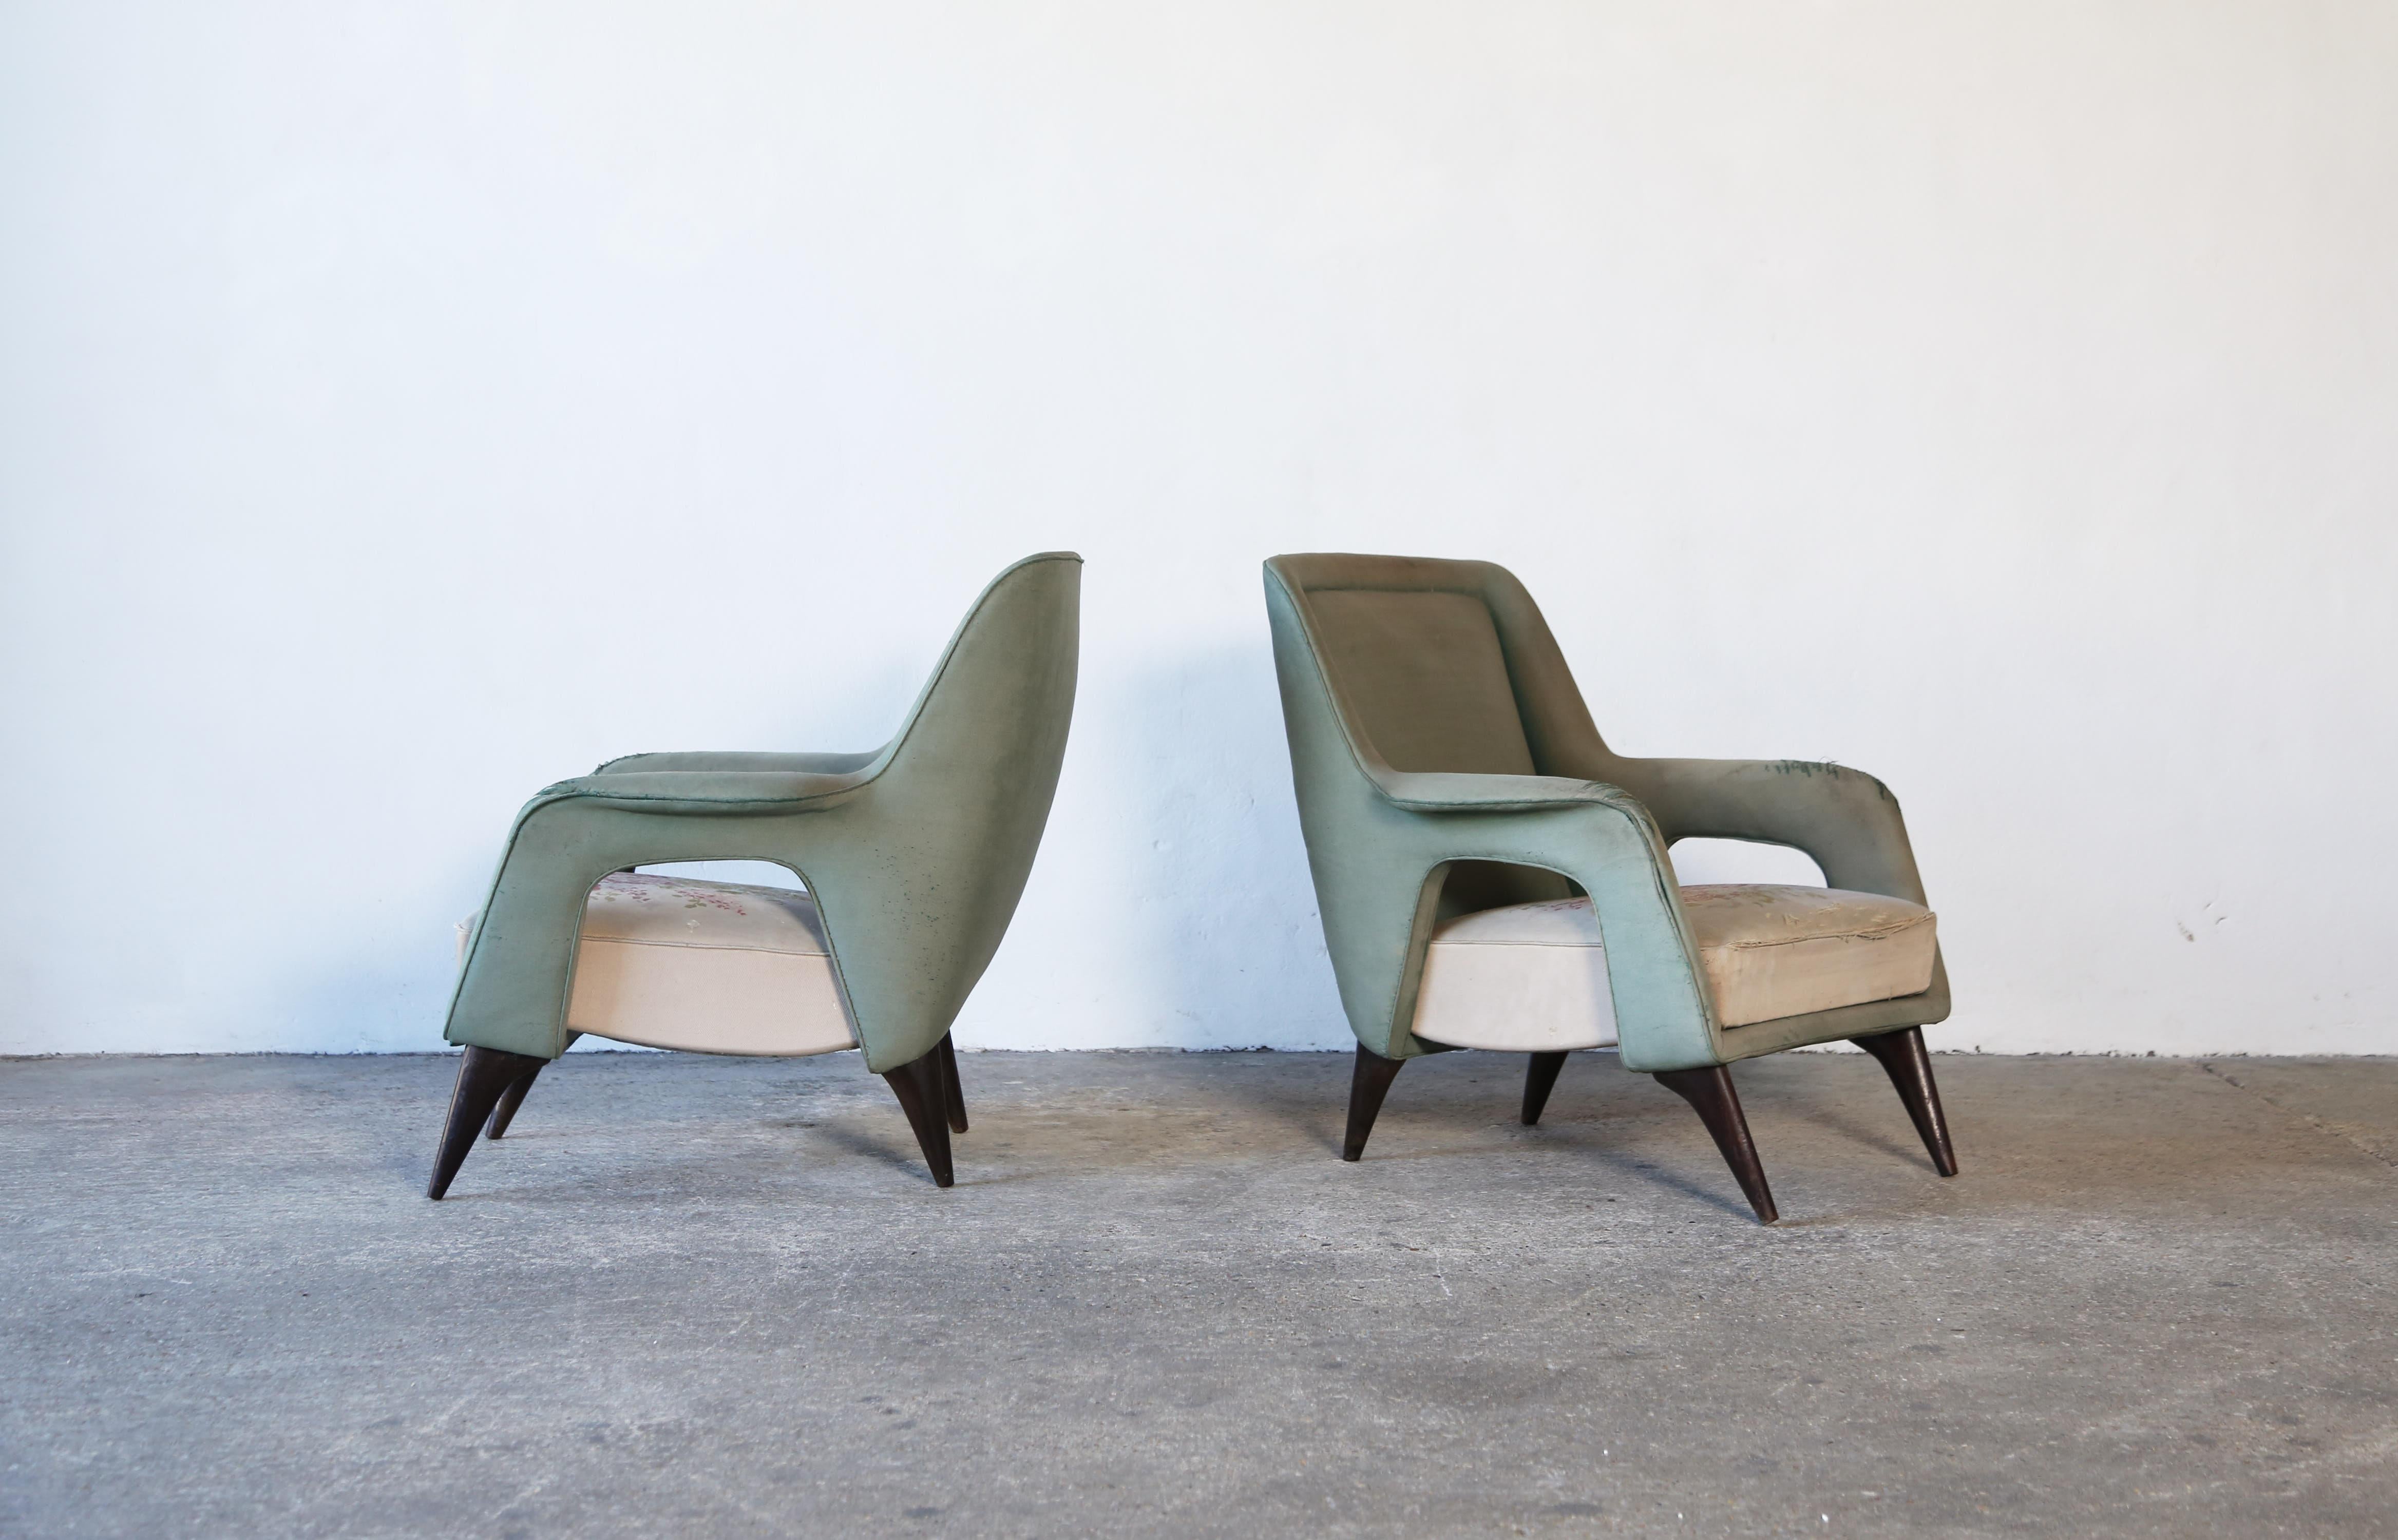 An extraordinary, rare pair of Italian 1950s armchairs.  Structurally sound, but the original upholstery is worn out so the chairs are sold for the customer to recover in their own choice of fabric.  Fast shipping worldwide.

